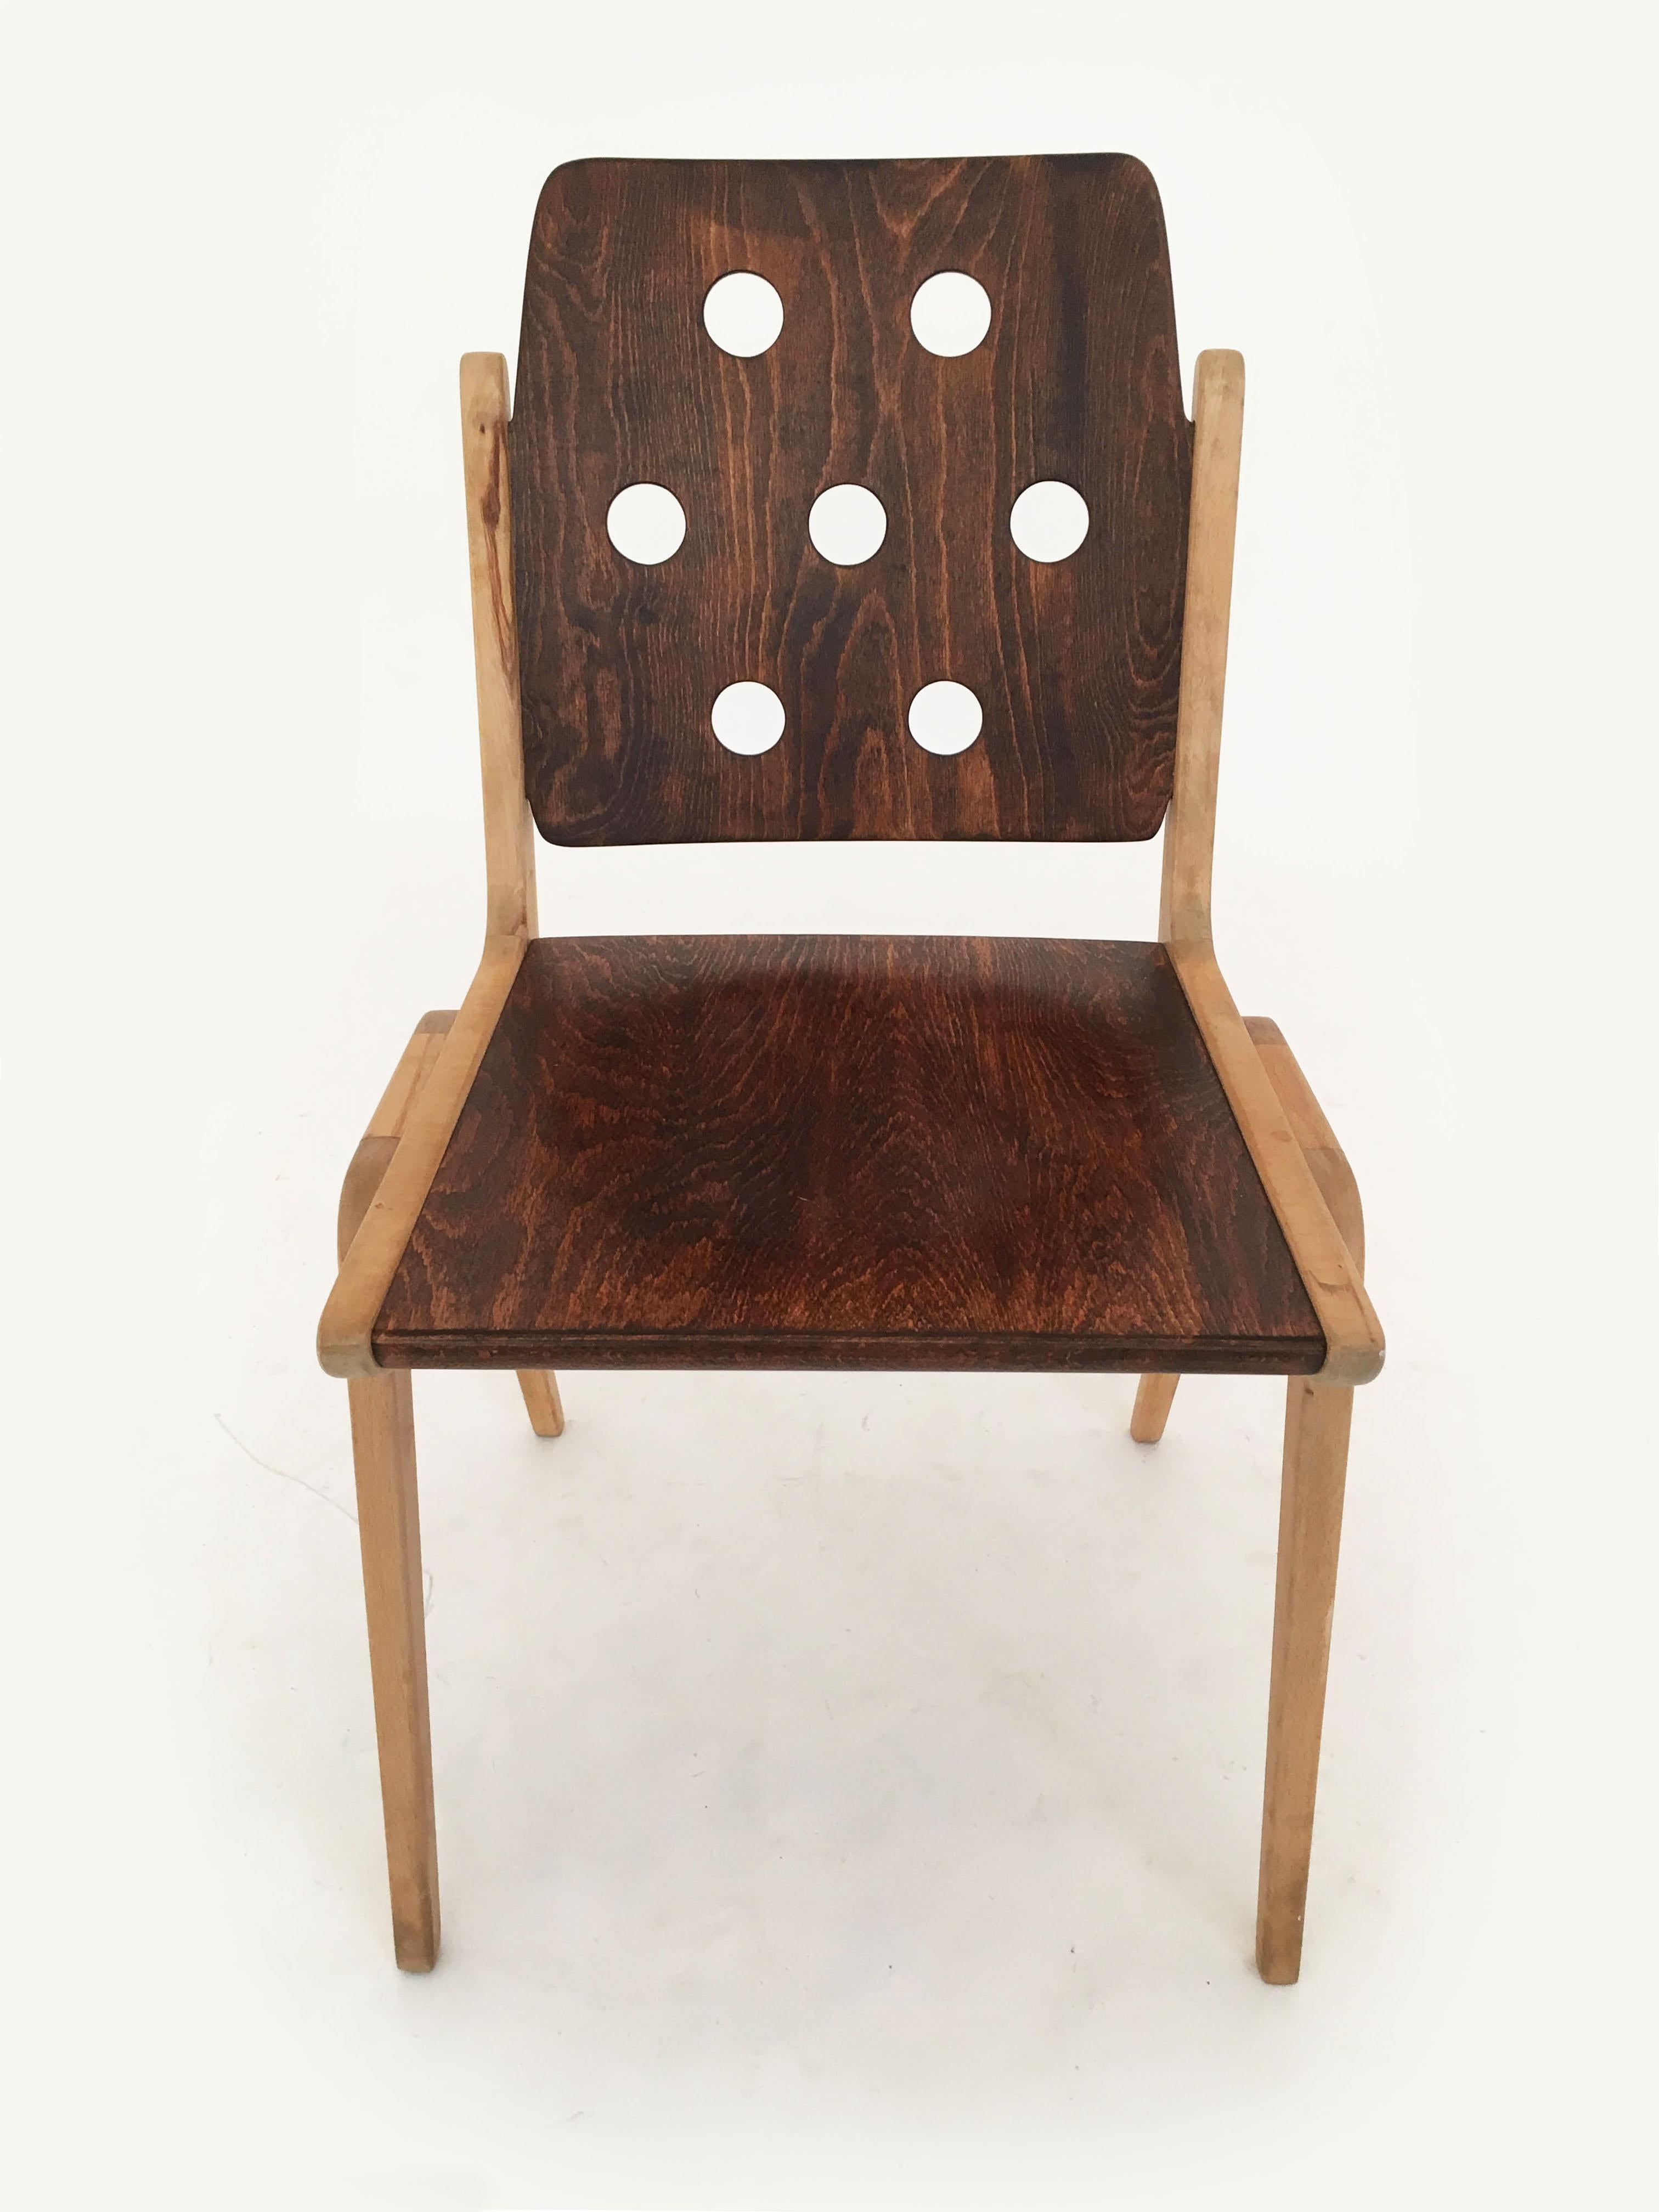 20th Century Set of Four Stacking Chairs Franz Schuster, Duo-Colored, Austria 1950s For Sale